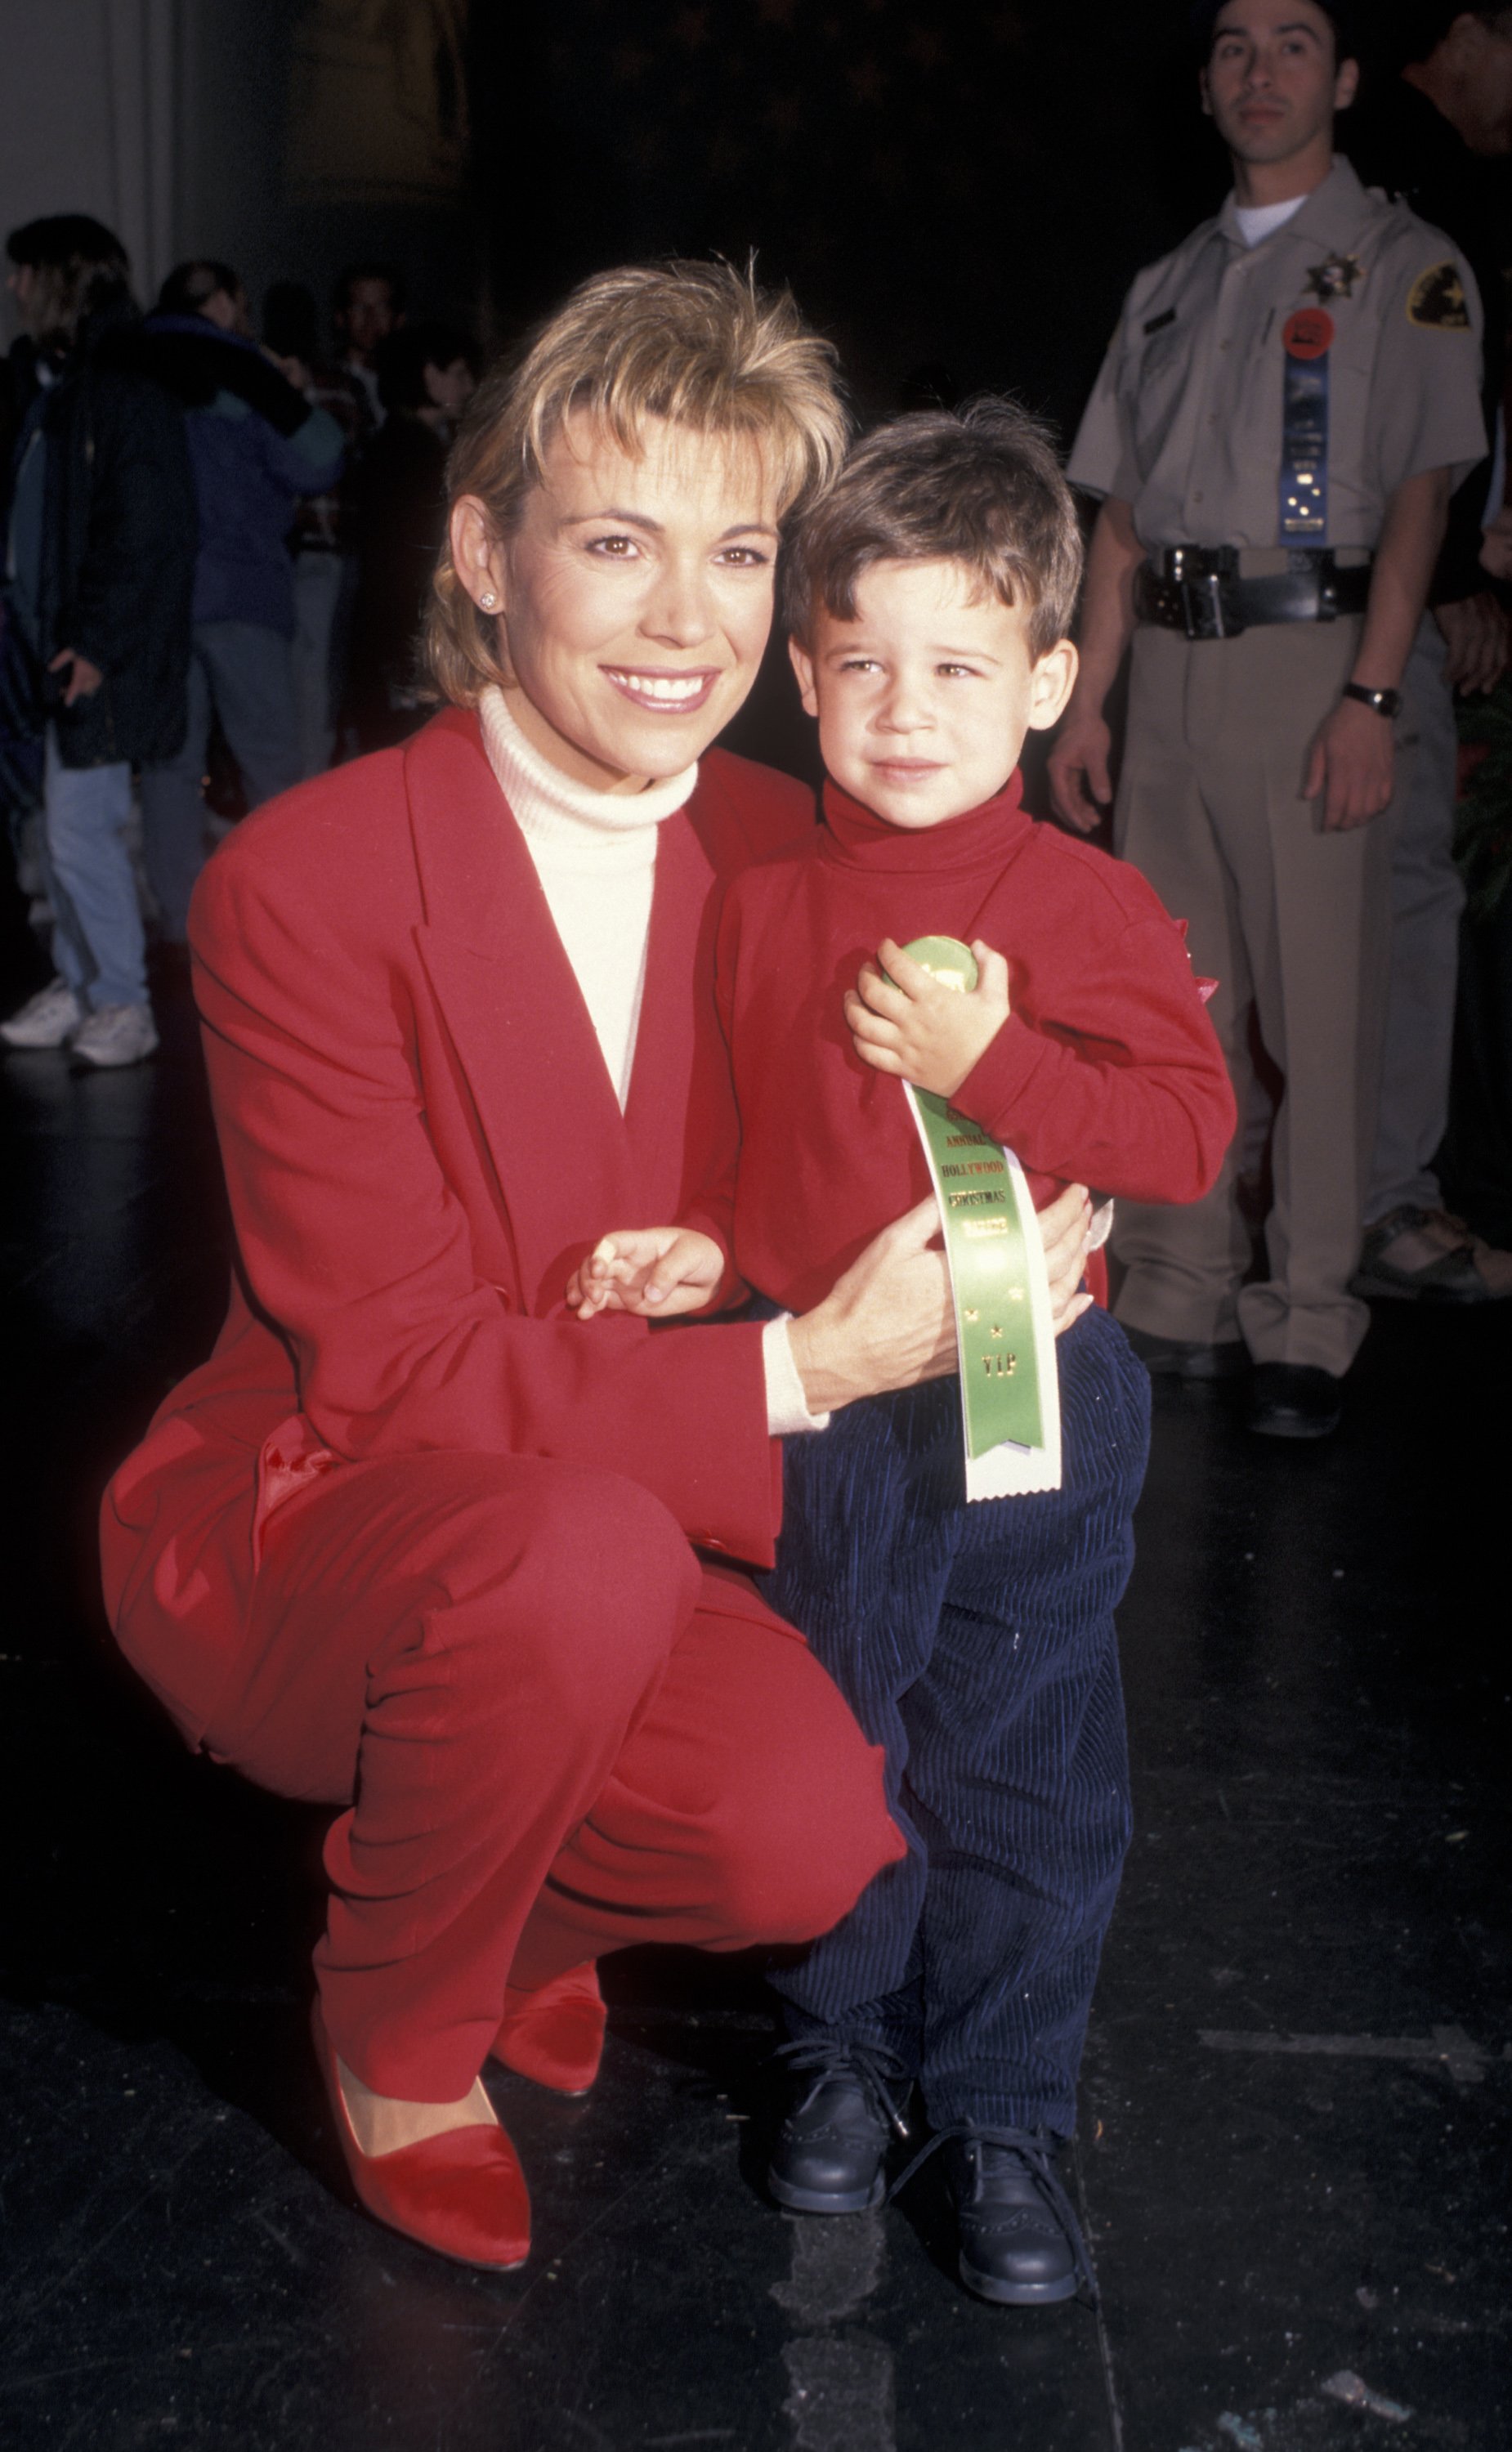 Vanna White and son Nicholas Santo Pietro during the 65th Annual Hollywood Christmas Parade on December 1, 1996 in Hollywood, California. / Source: Getty Images